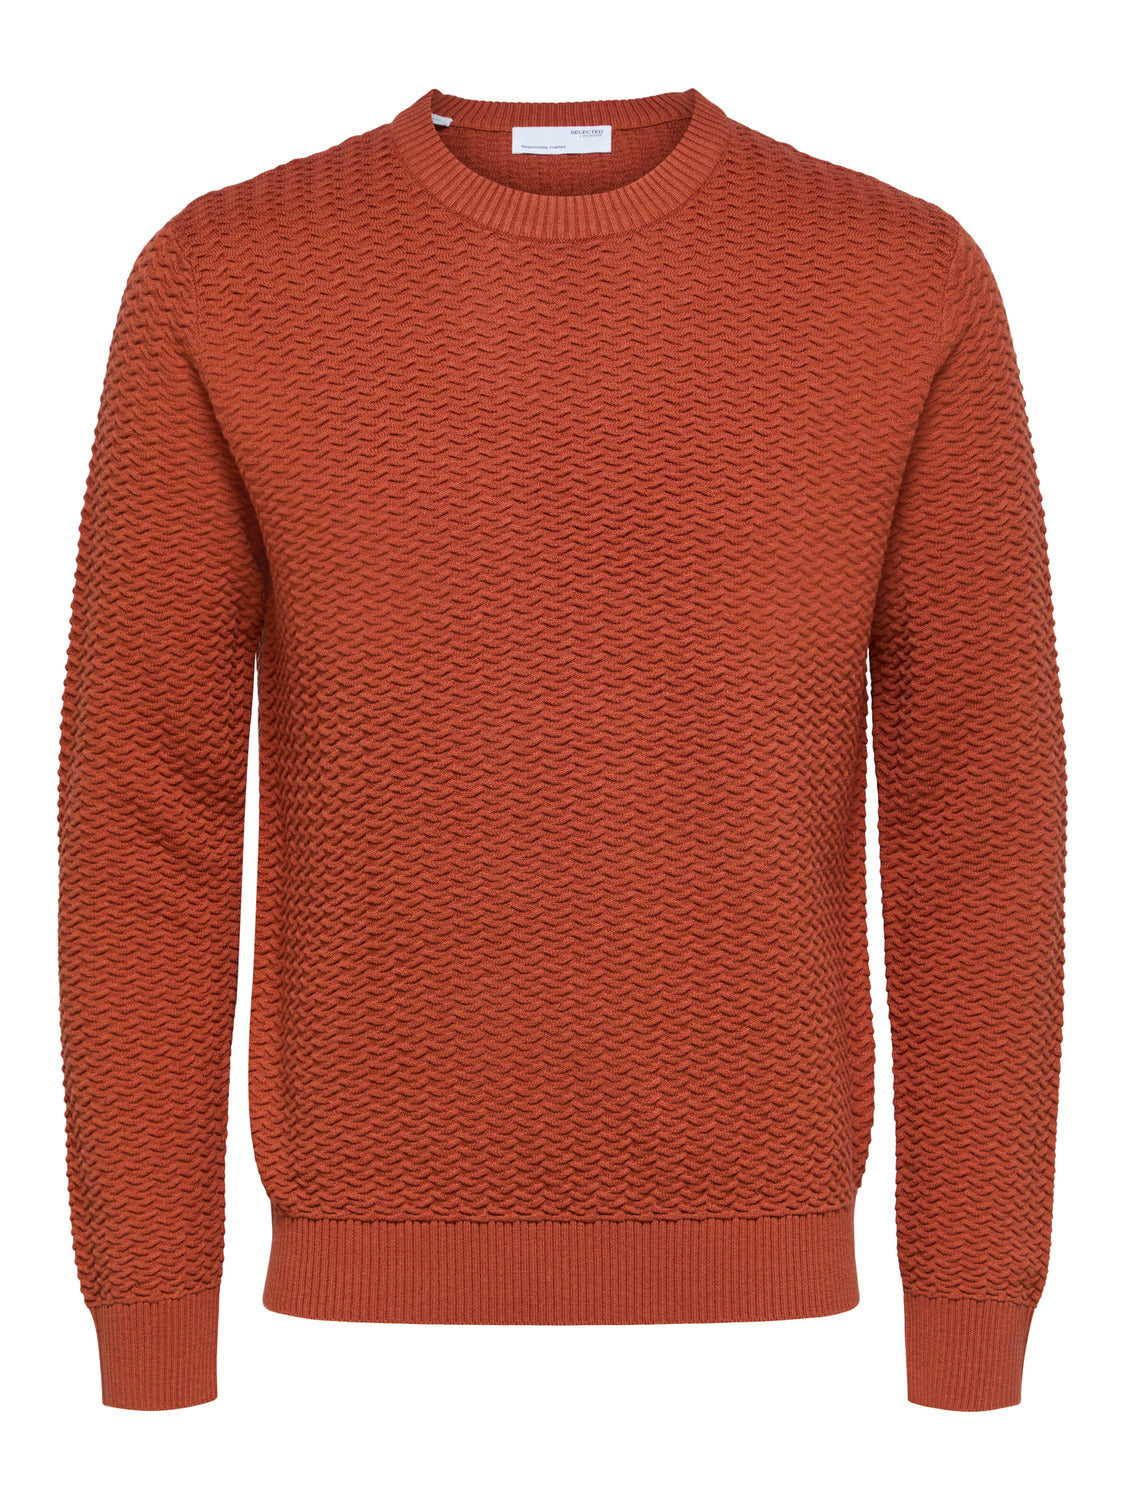 SELECTED HOMME - CHRIS Pullover - Baked Clay